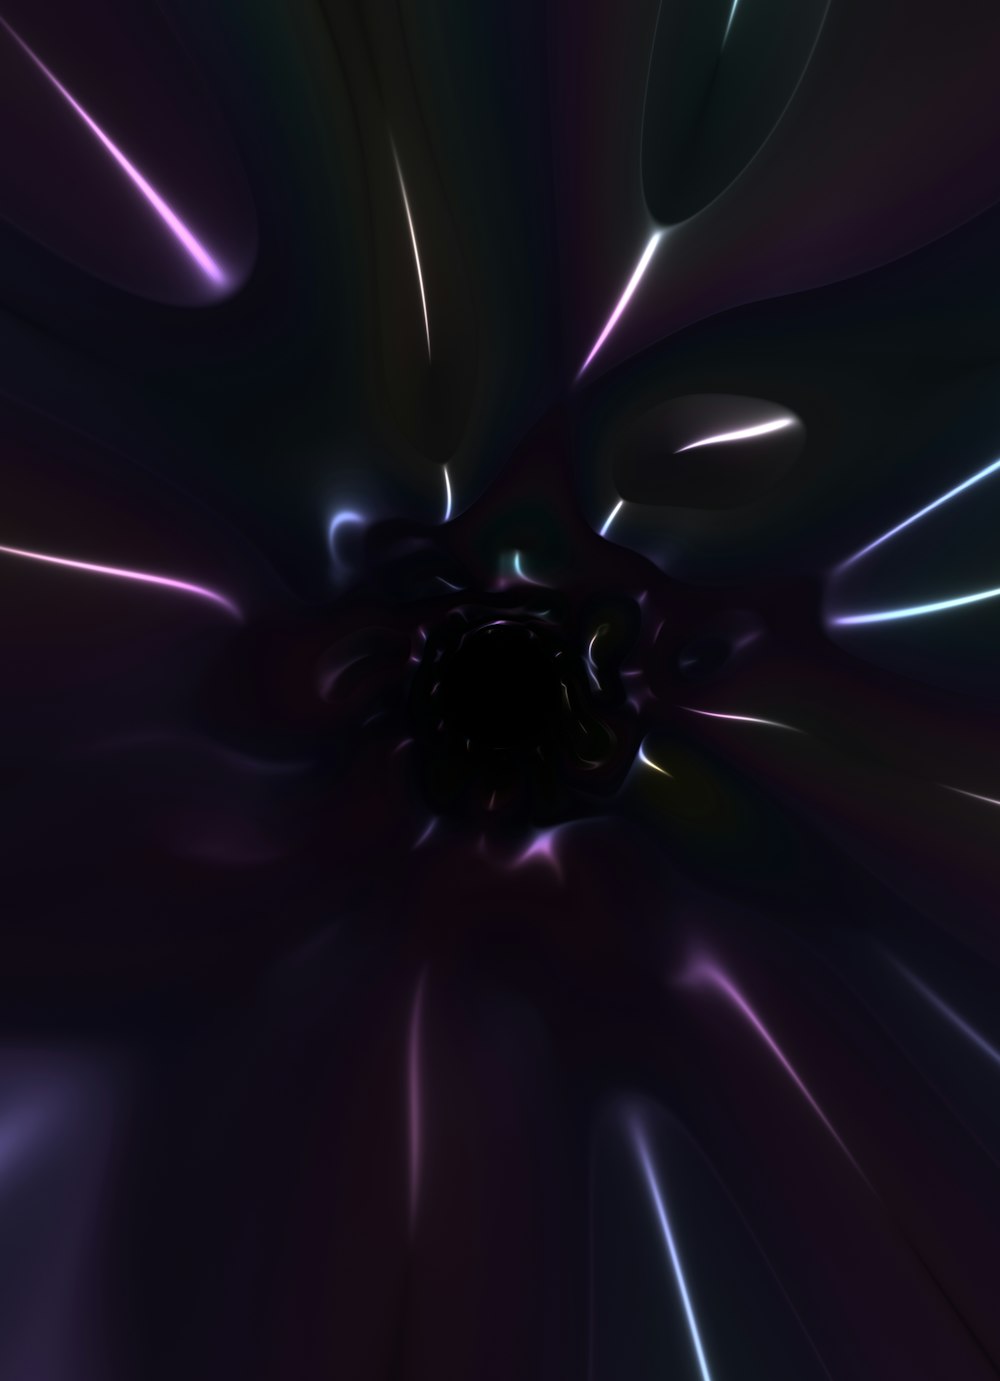 a purple flower with a black center surrounded by blue and purple lights